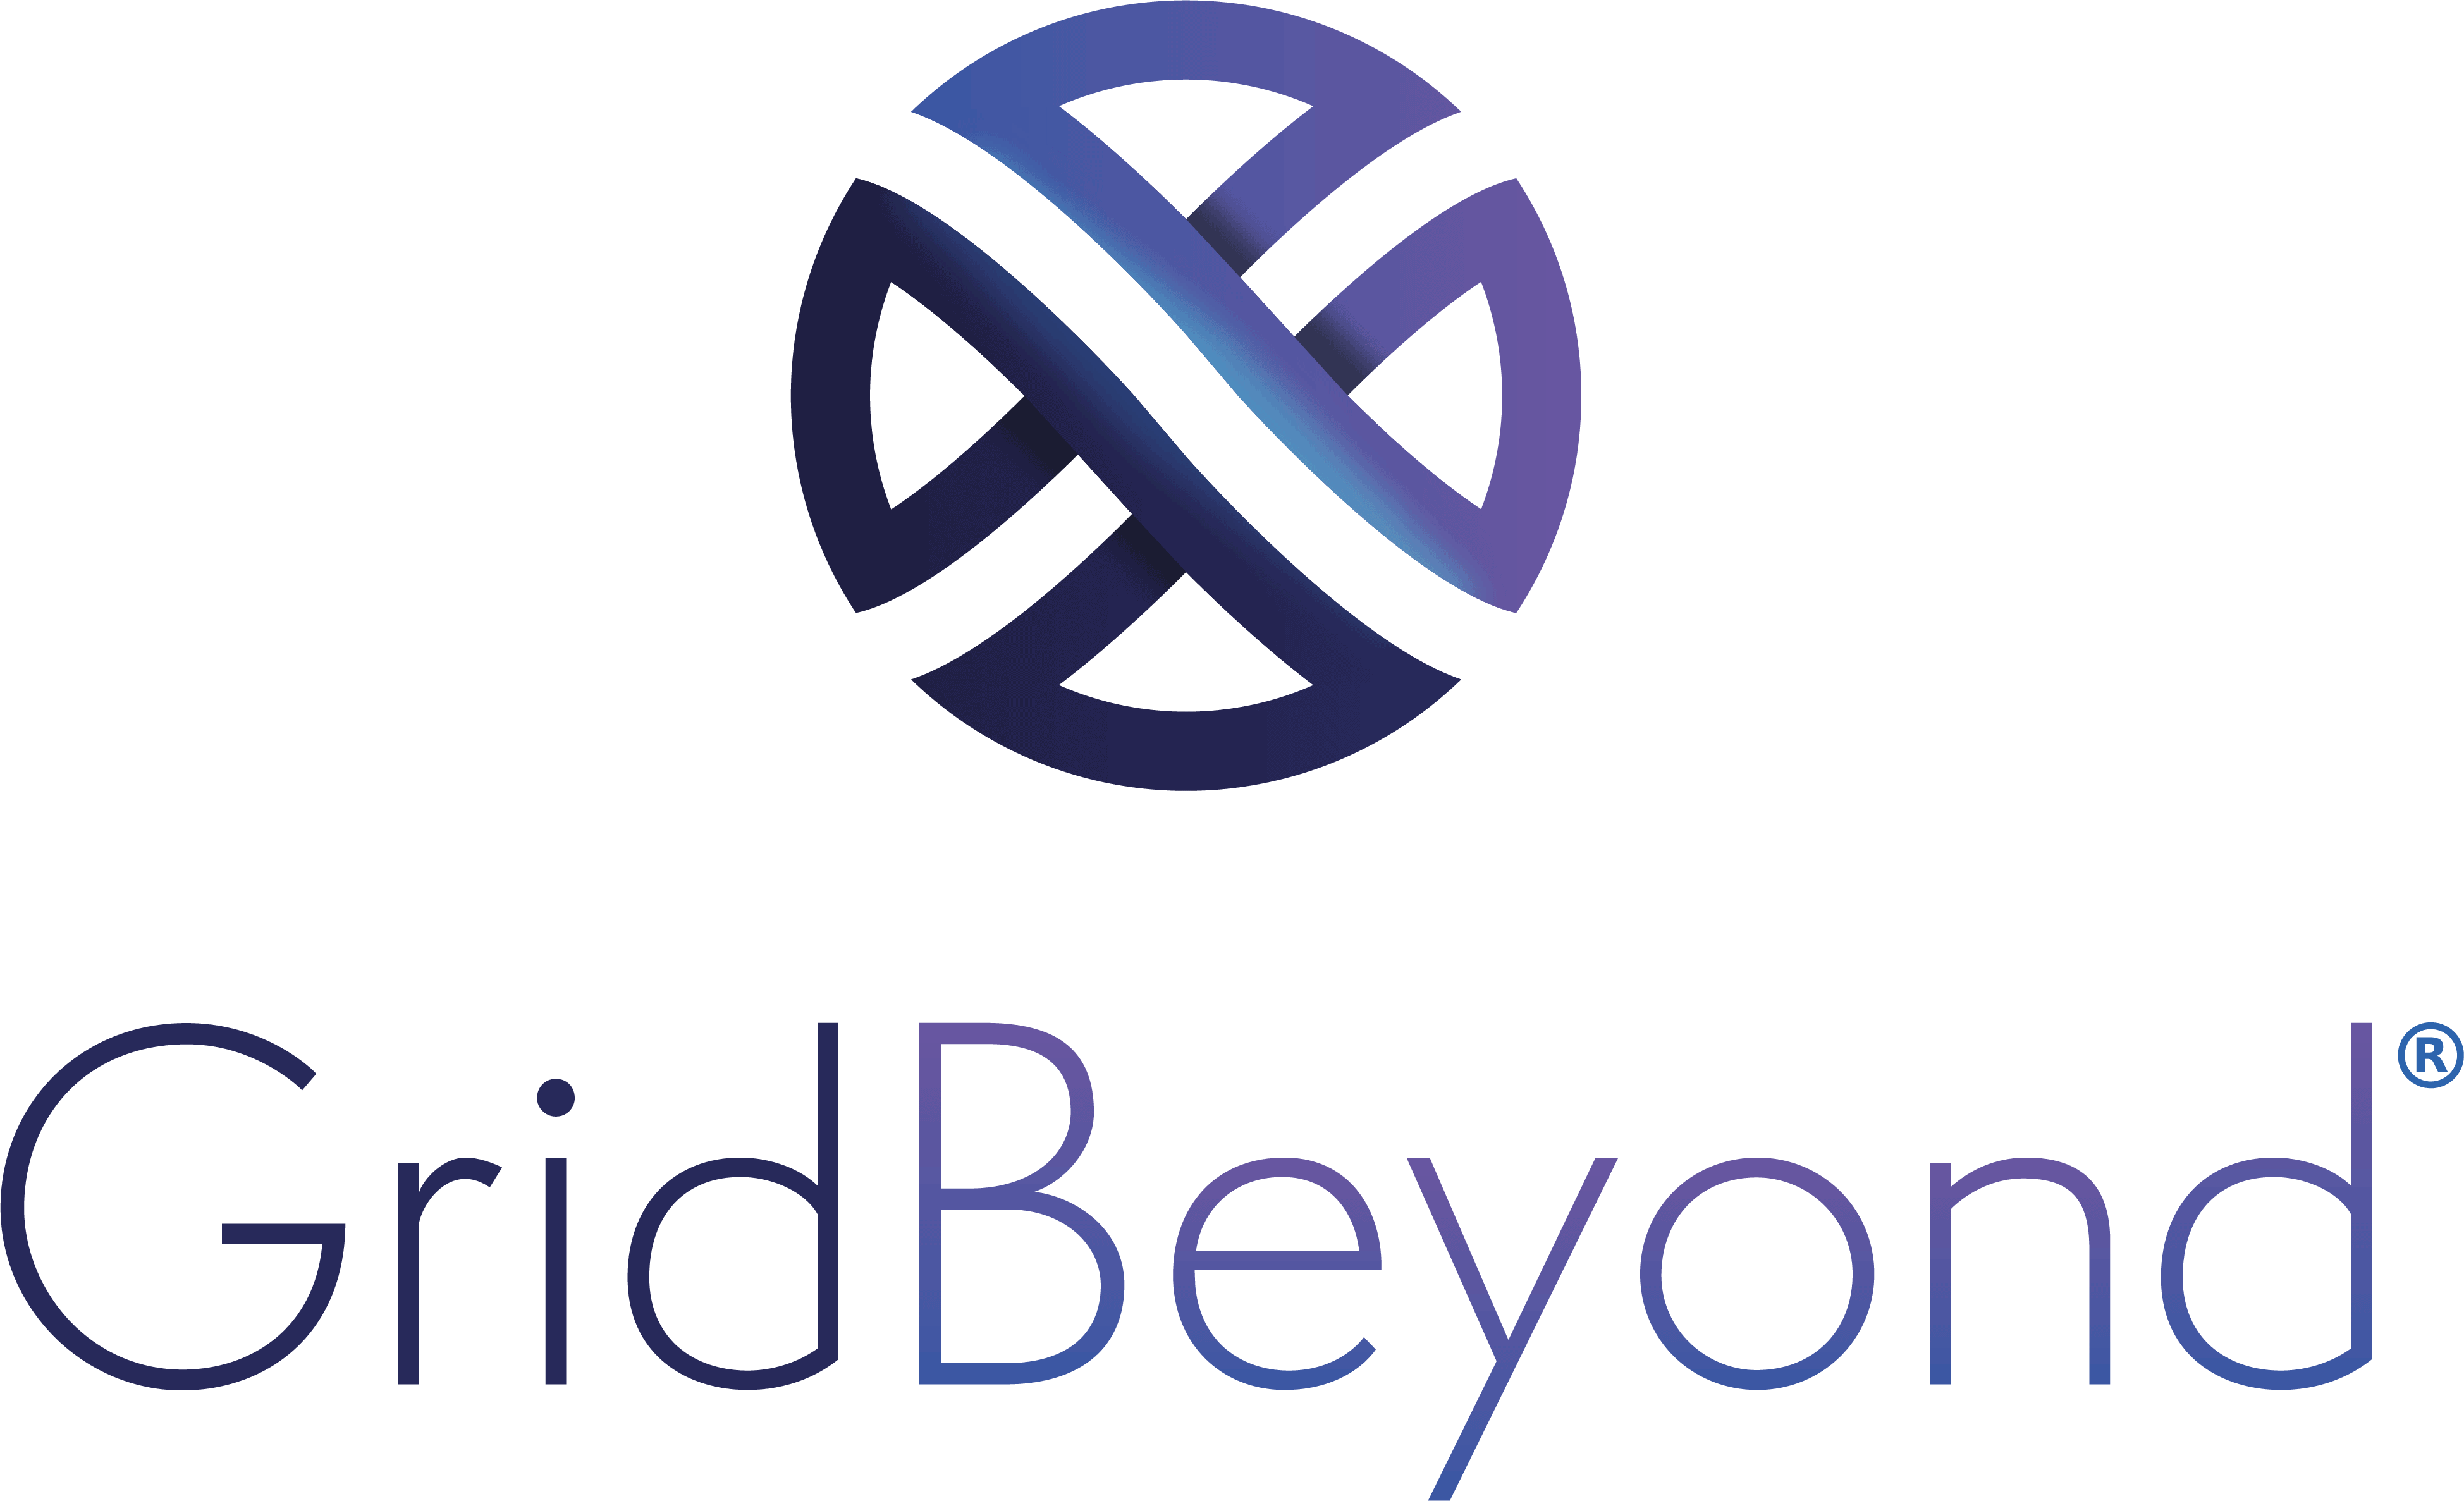 Aphotograph of GridBeyond logo, a circle splited in 4 which represents the AI-powered platform which can transform your energy into opportunity and help businesses reduce costs